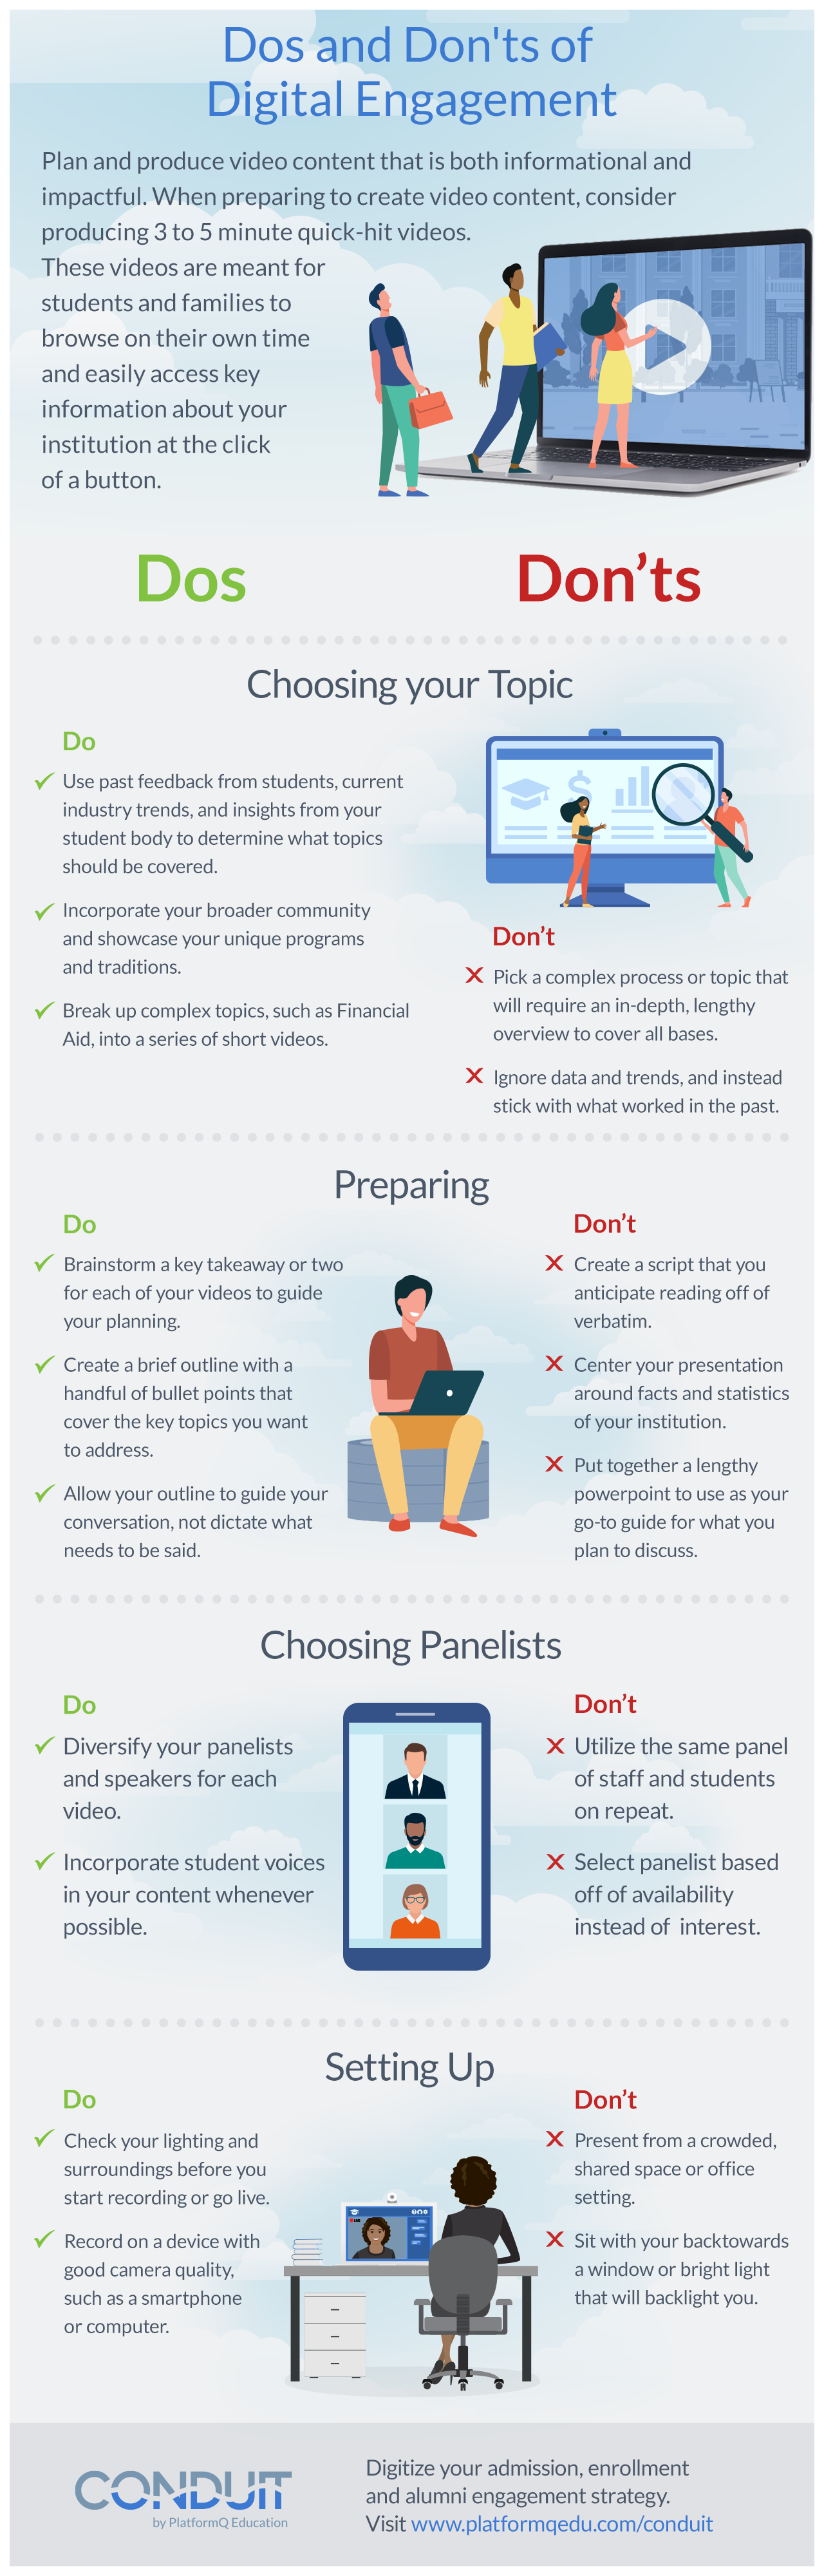 Infographic detailing dos and don'ts of digital engagement, including choosing your topic, preparing, choosing panelists, and setting up. Summary of dos and don'ts for each topic can be found in the blog content below the image.